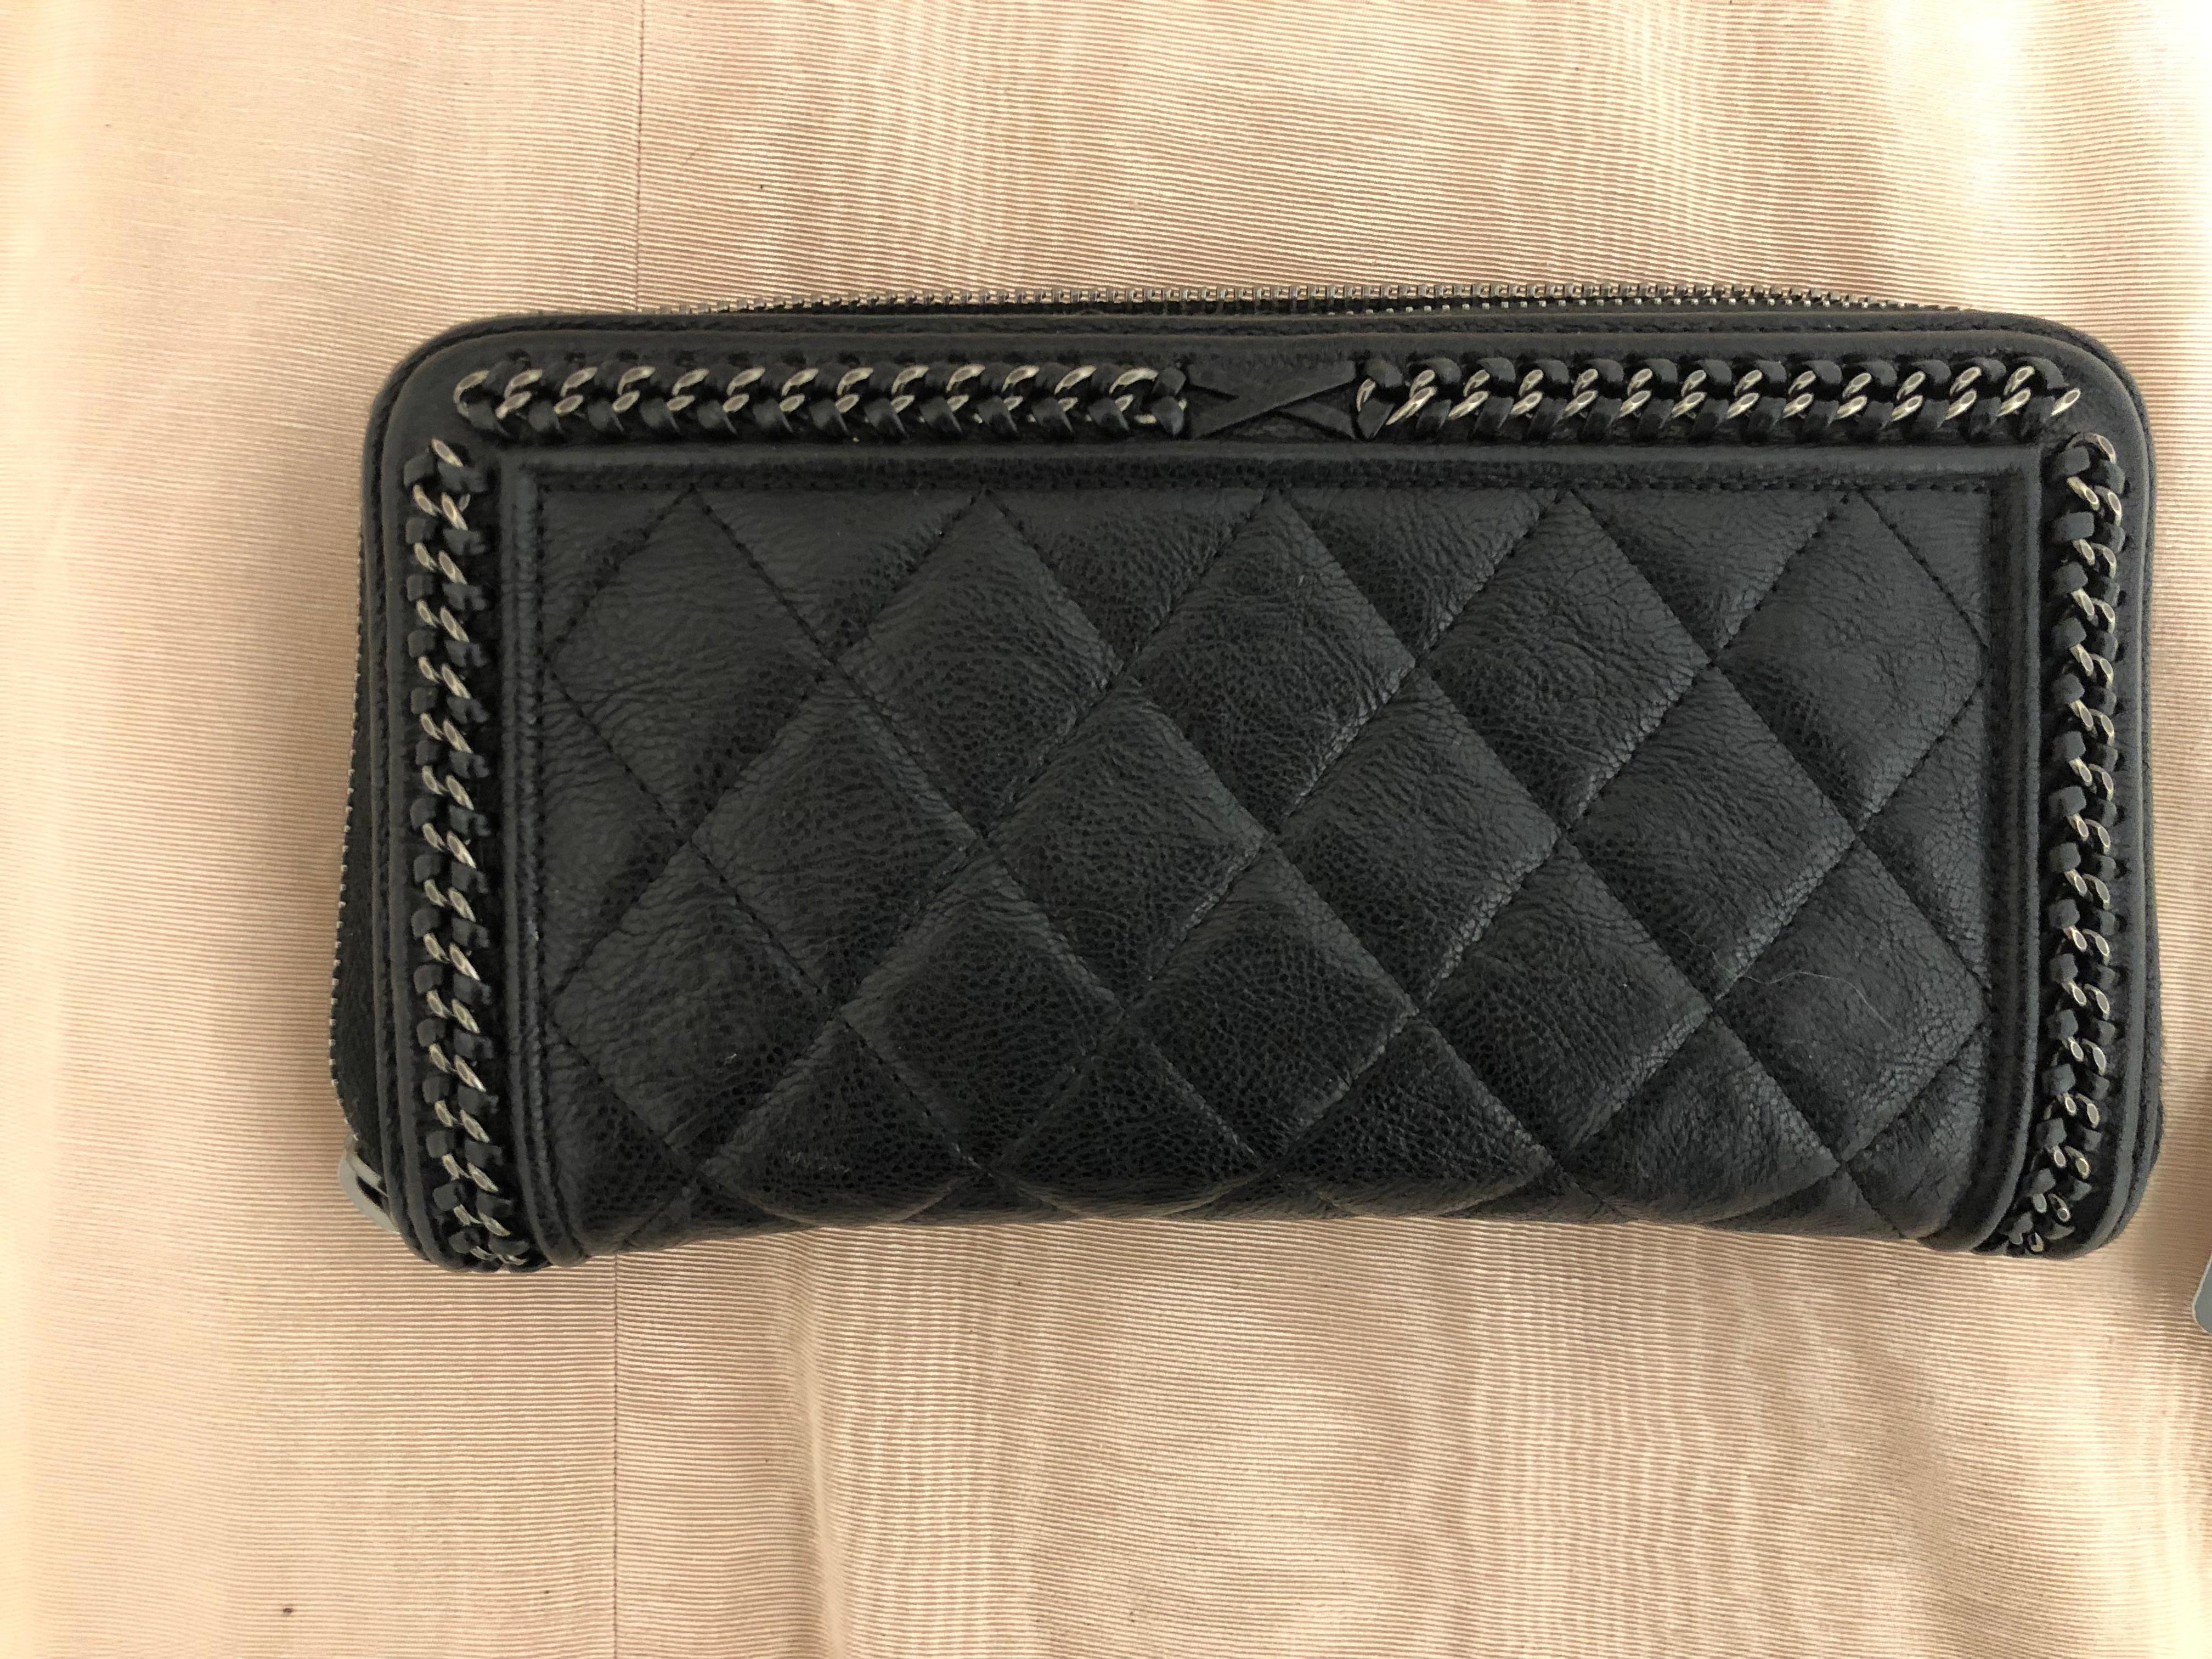 2016-17 Limited Edition Black Boy Chanel Long Wallet/Clutch Series 22 1